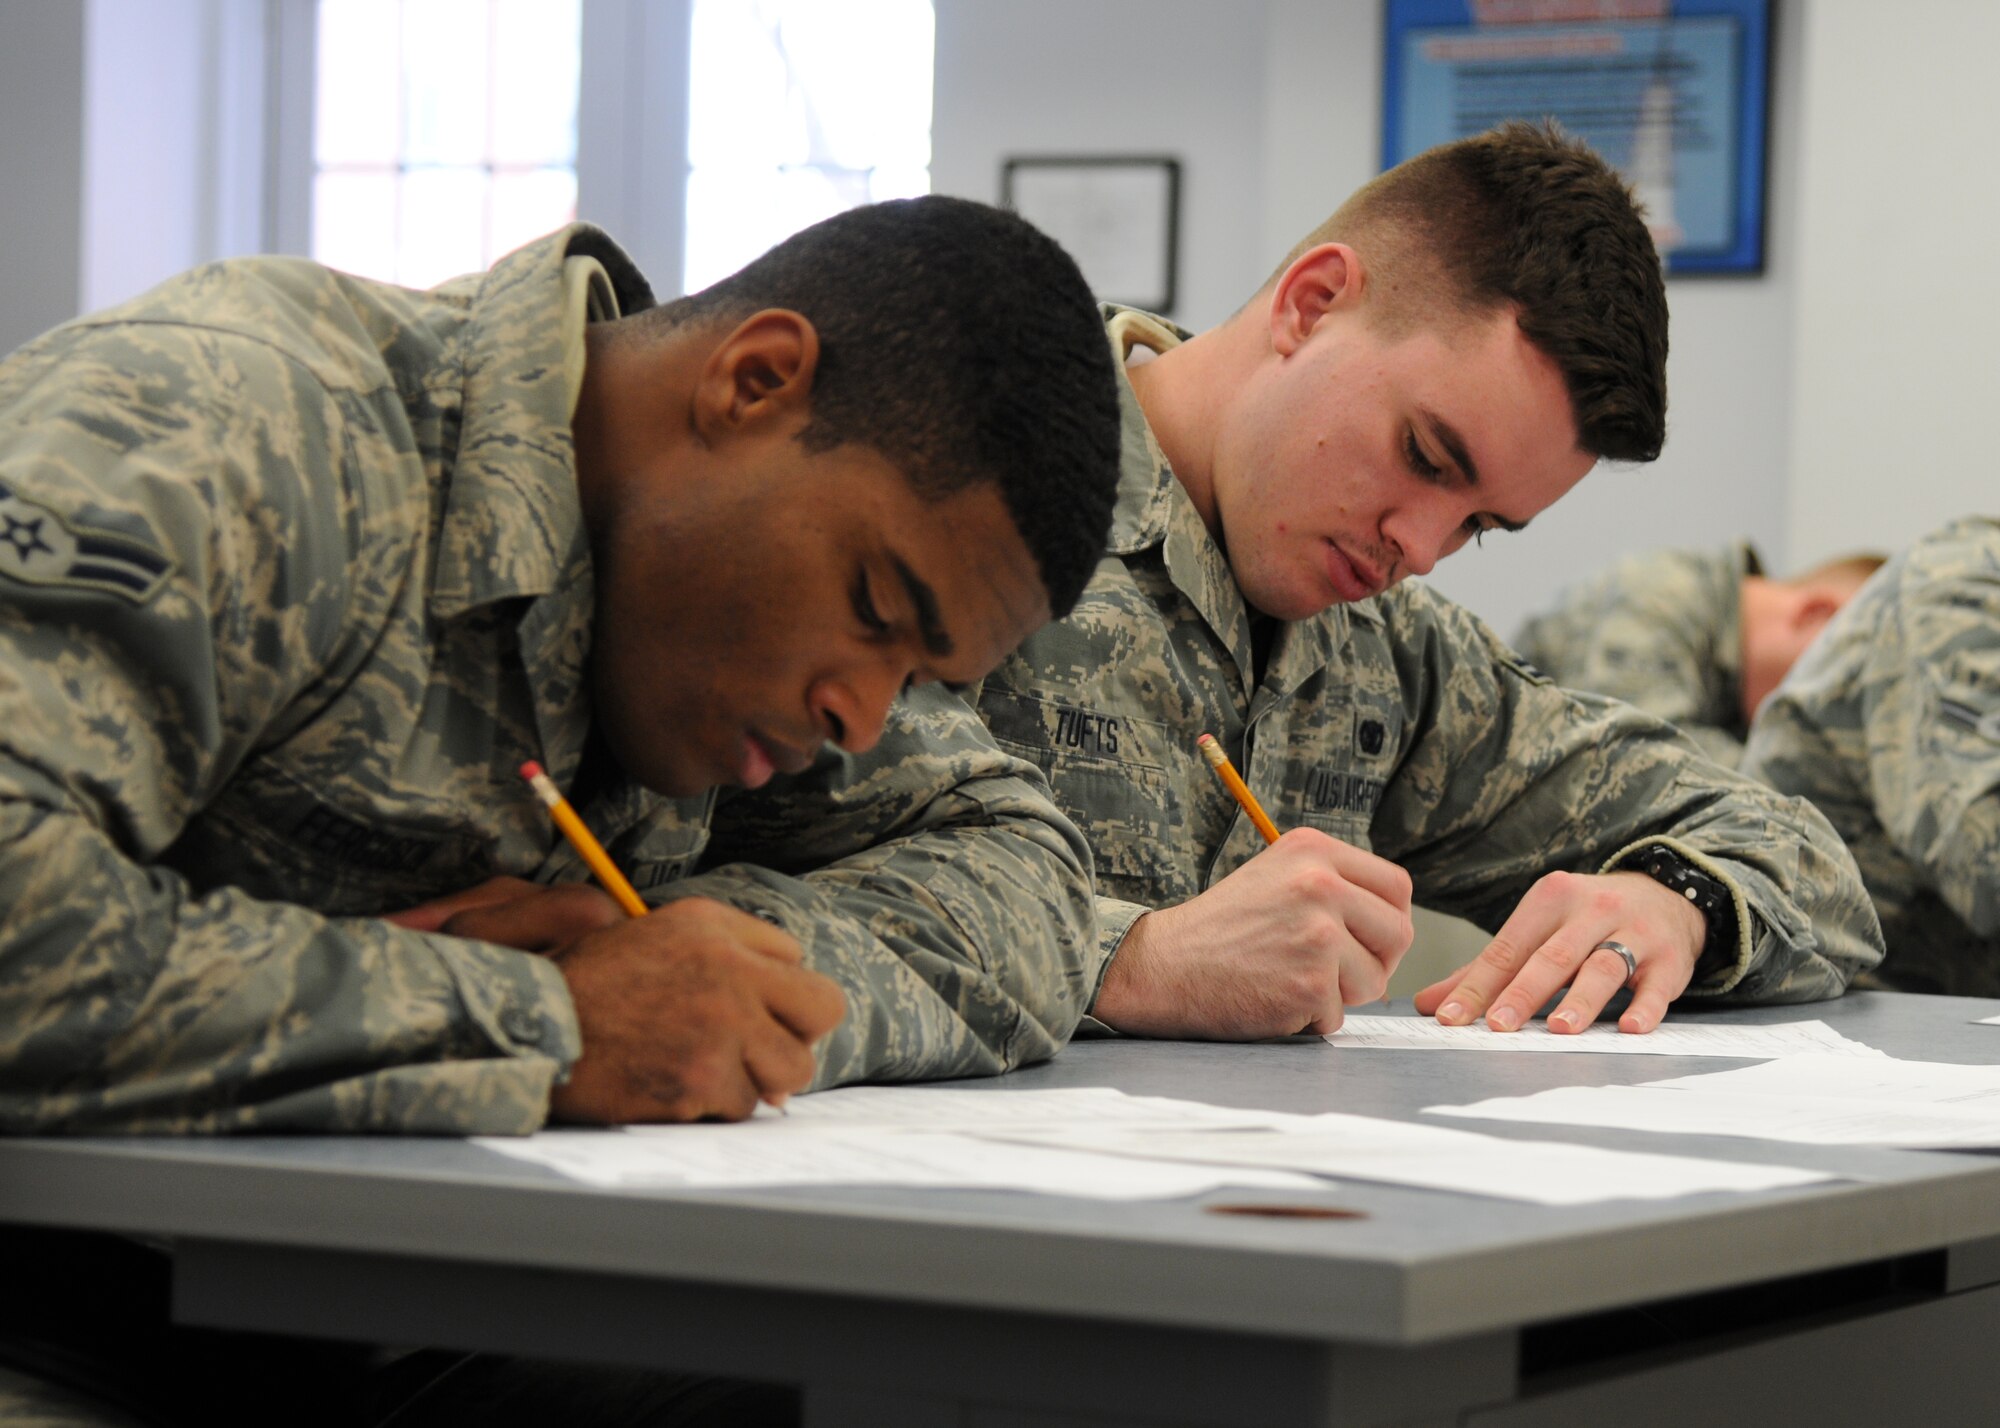 Airmen 1st Class Akeem Ferguson and Kevin Tufts, 90th Missile Security Forces Squadron, fill out paperwork during their Unit Orientation Training on F.E. Warren Air Force Base, Wyo., Dec. 22, 2014. During the training, security forces members learn the basic skills they need to accomplish the mission. (U.S. Air Force photo/Airman 1st Class Malcolm Mayfield)